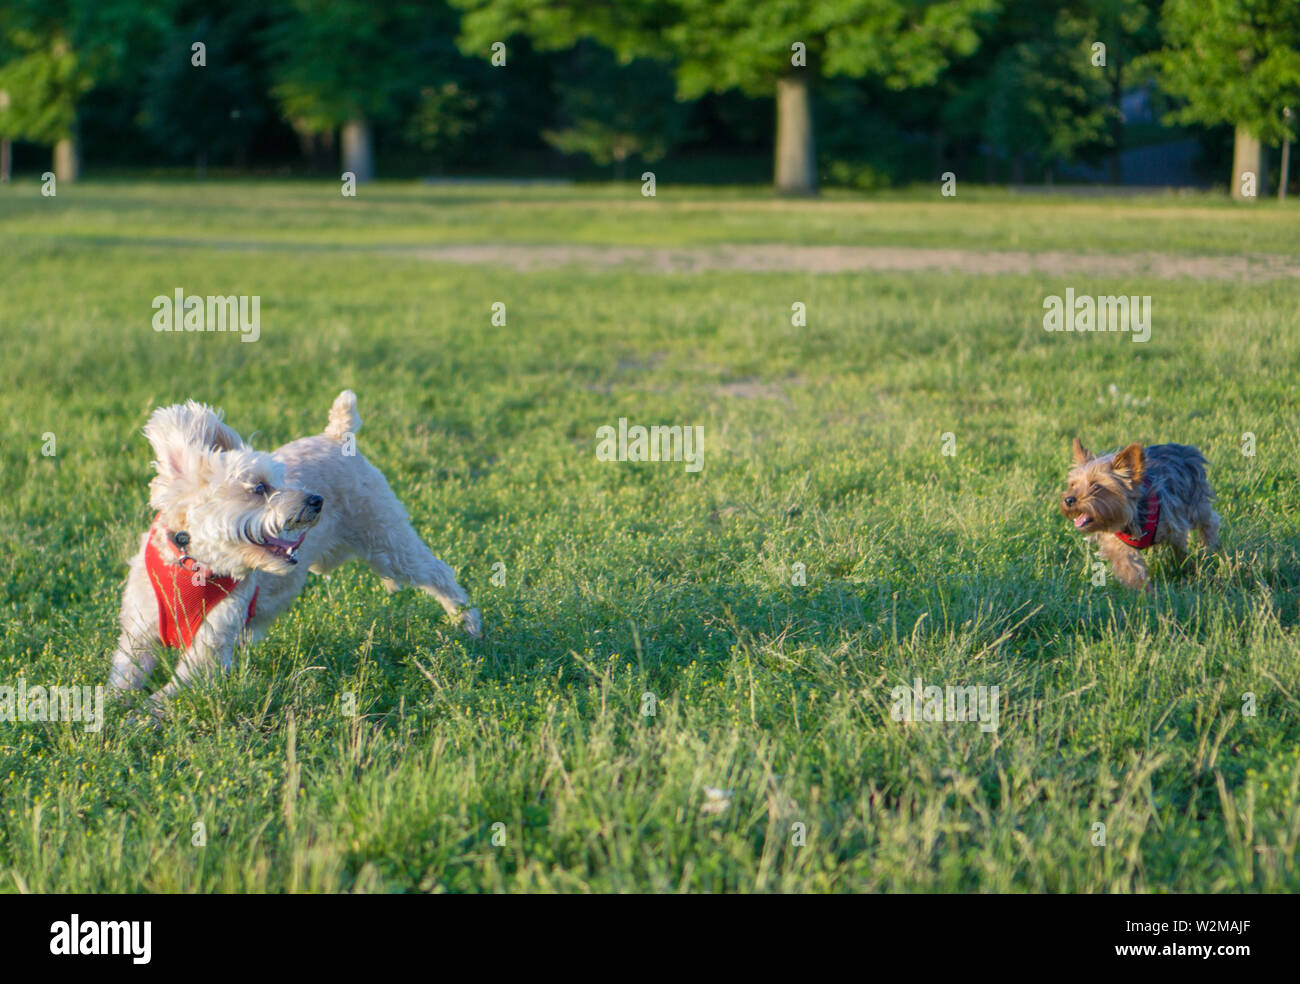 My dog randomly made friends with a puppy and made an instant connection Stock Photo